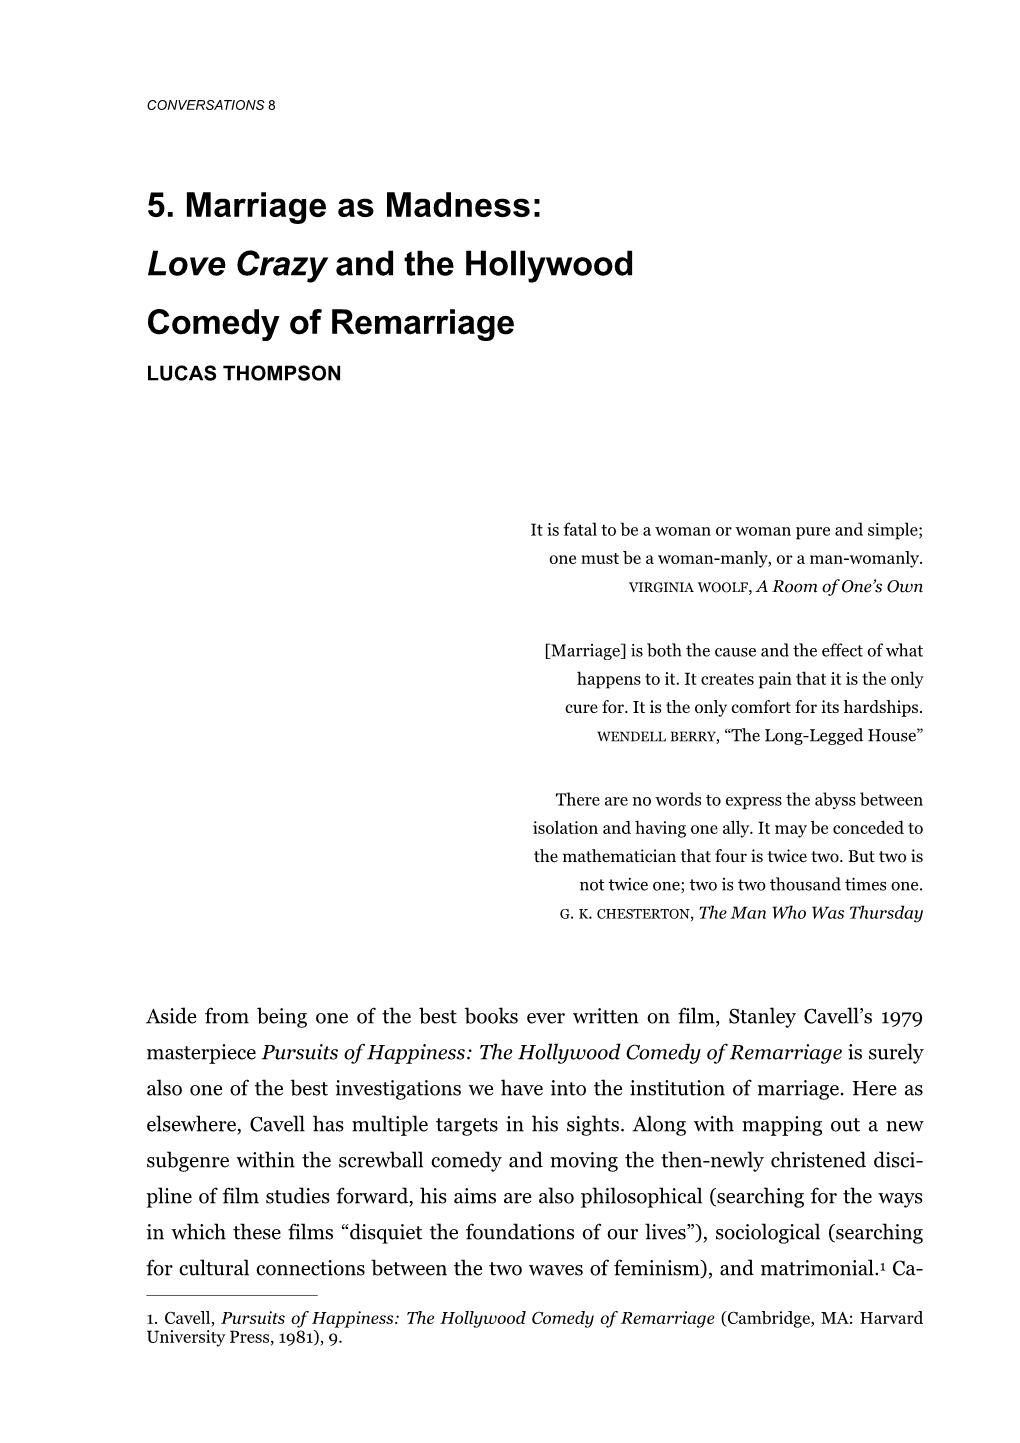 5. Marriage As Madness: Love Crazy and the Hollywood Comedy of Remarriage